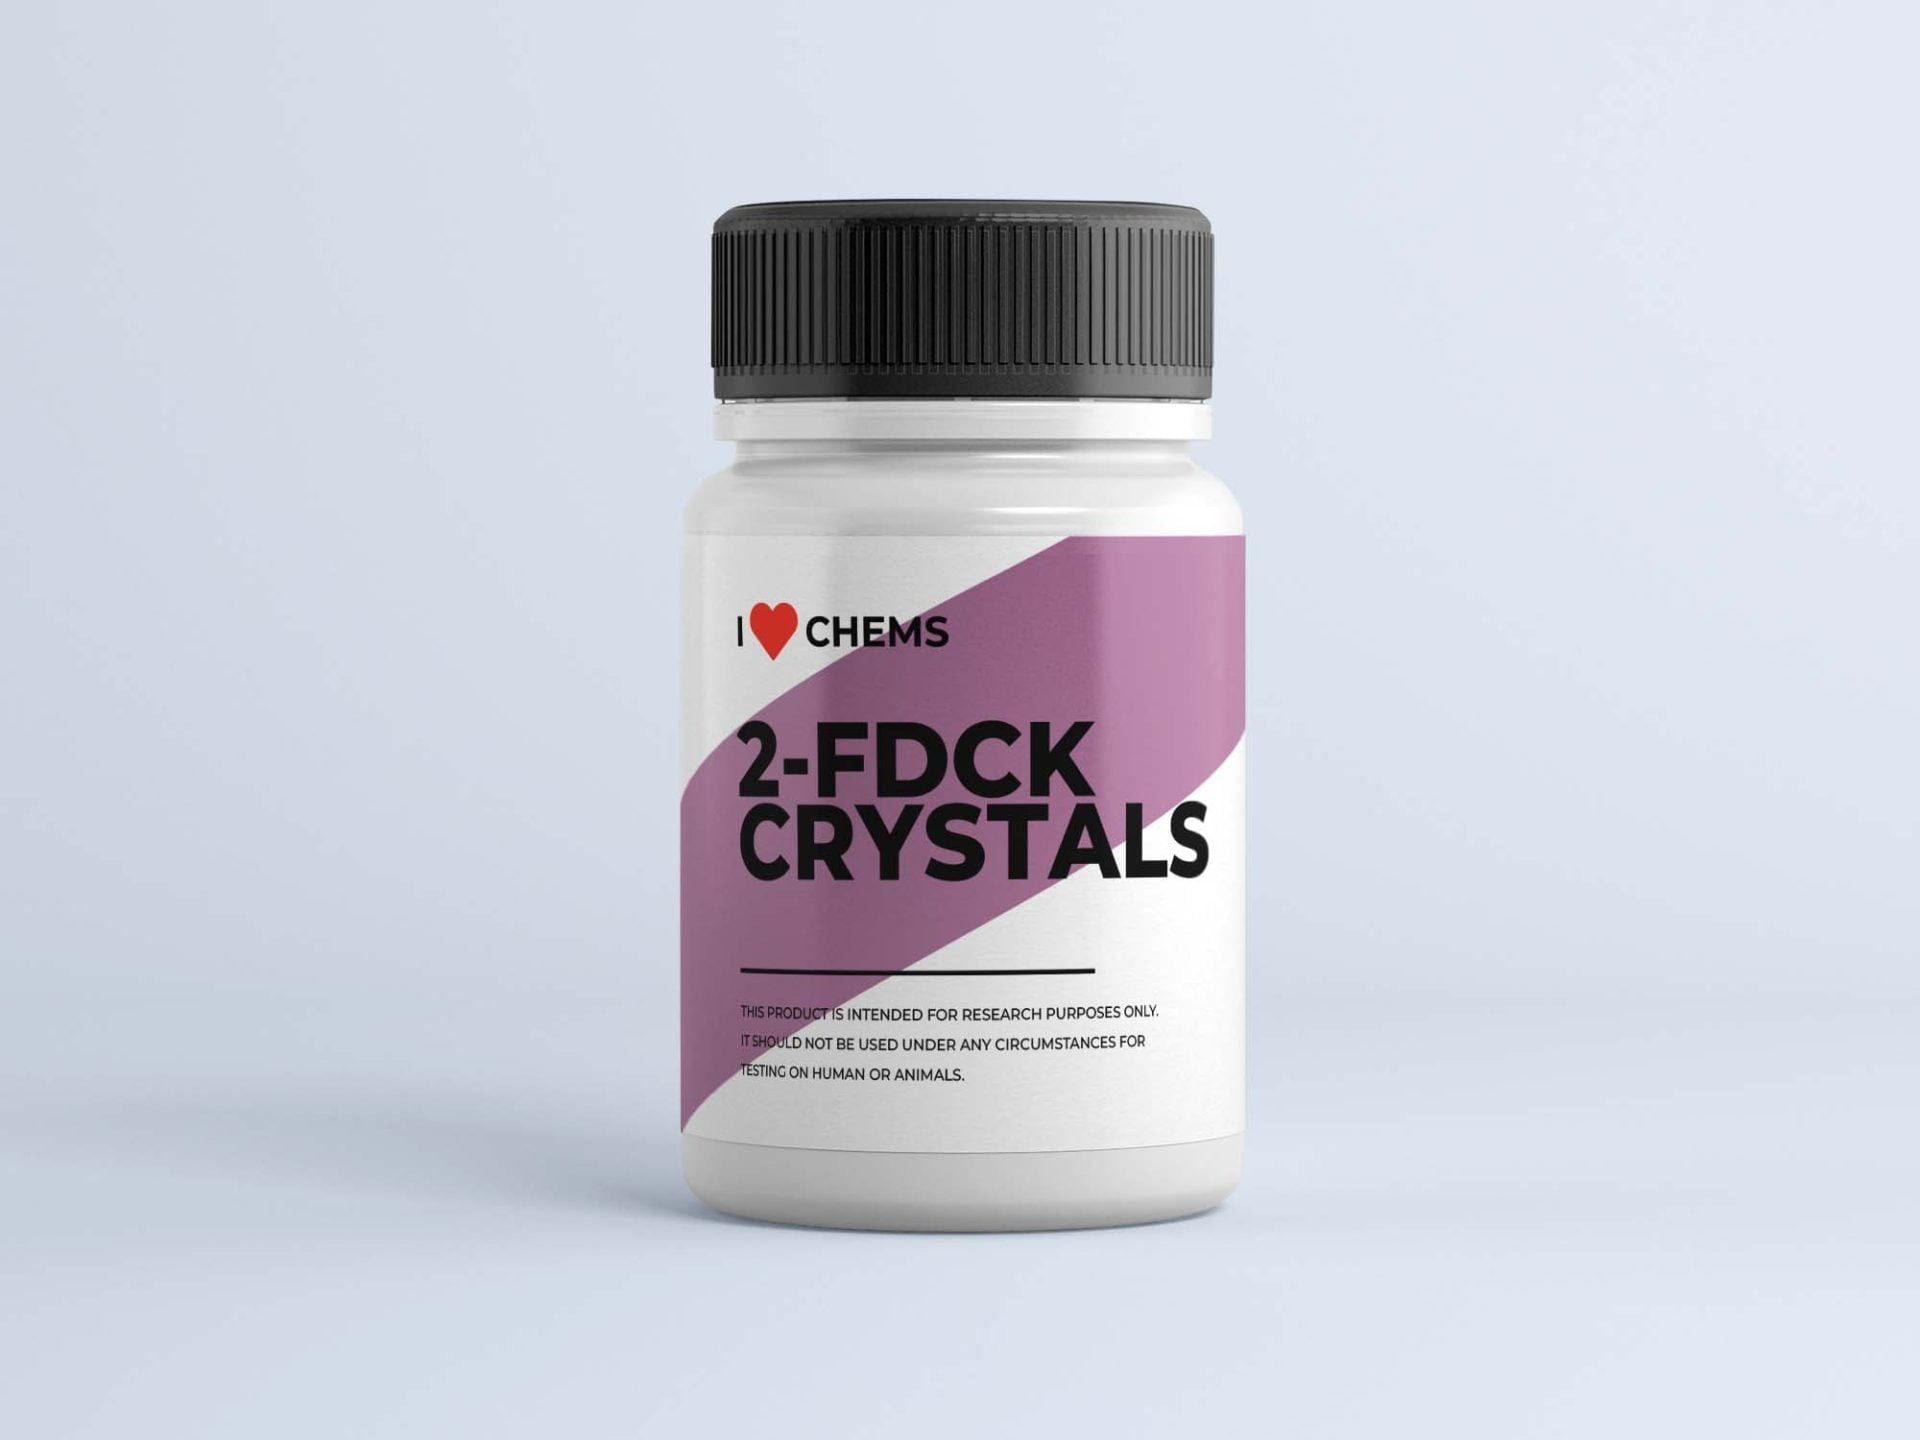 ilovechems rc 2fdck crystals-ilovechems